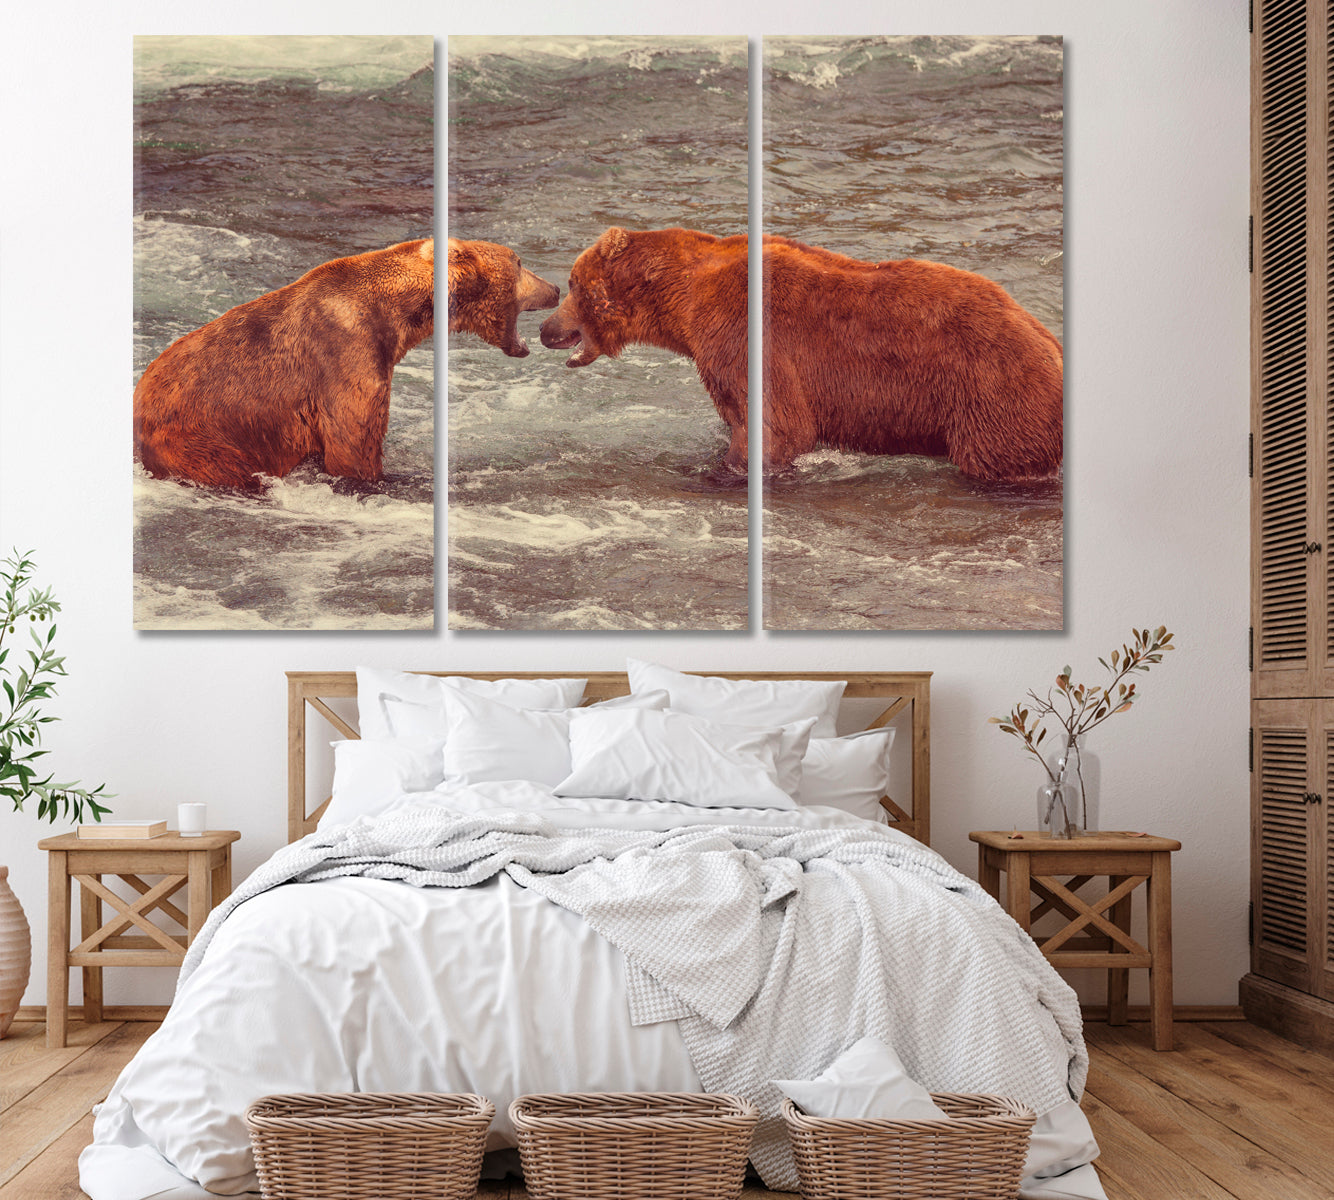 Grizzly Bears Hunting Salmon at Brooks Falls Alaska Canvas Print ArtLexy 3 Panels 36"x24" inches 